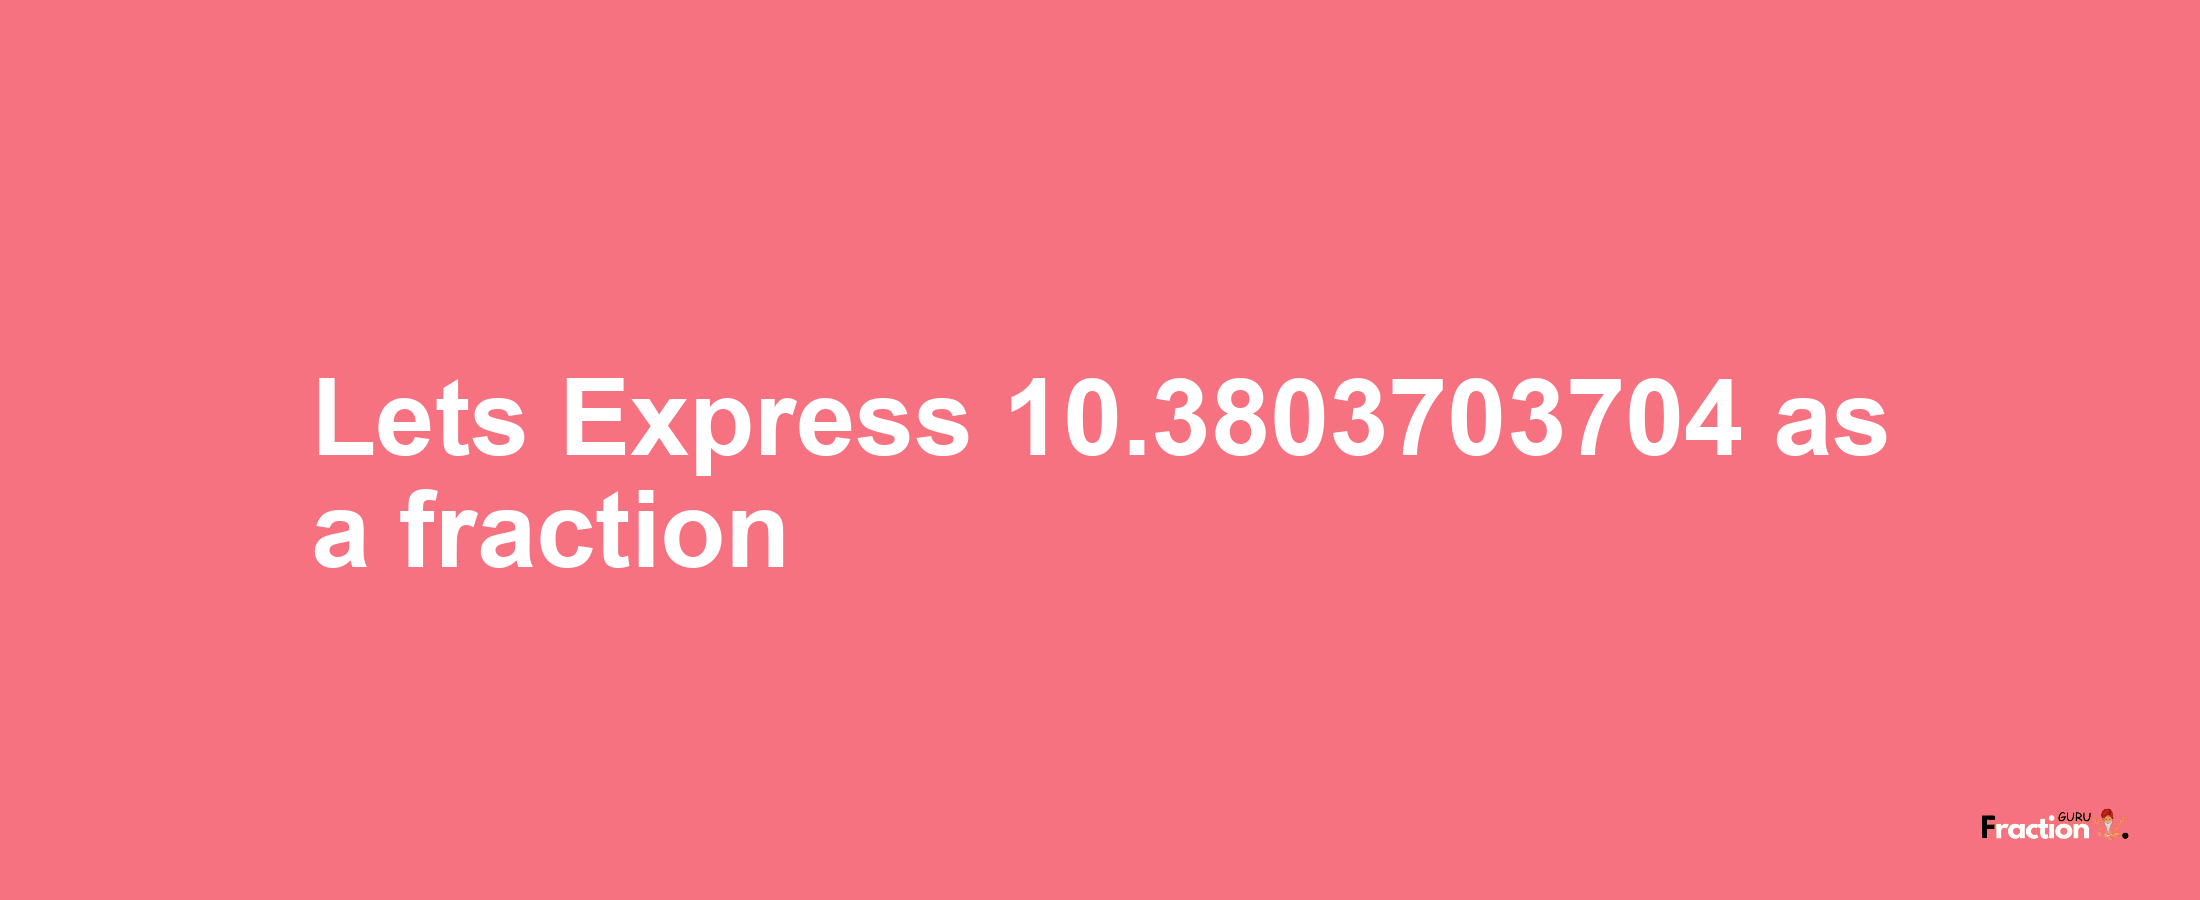 Lets Express 10.3803703704 as afraction